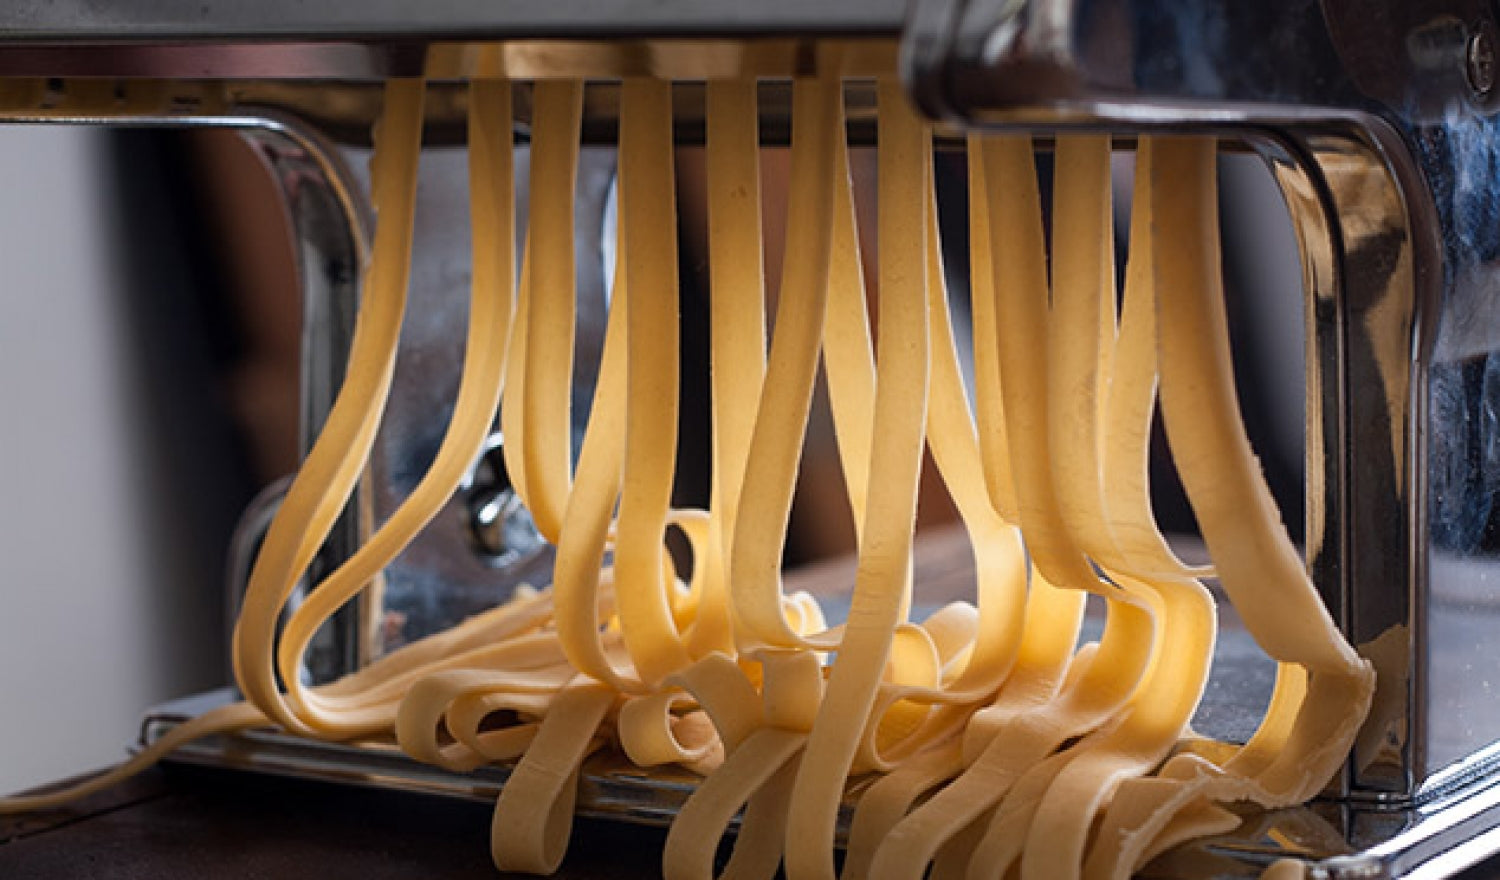 The 7 Essentials in My Pasta Making Toolkit — TheDolceVitaExperience